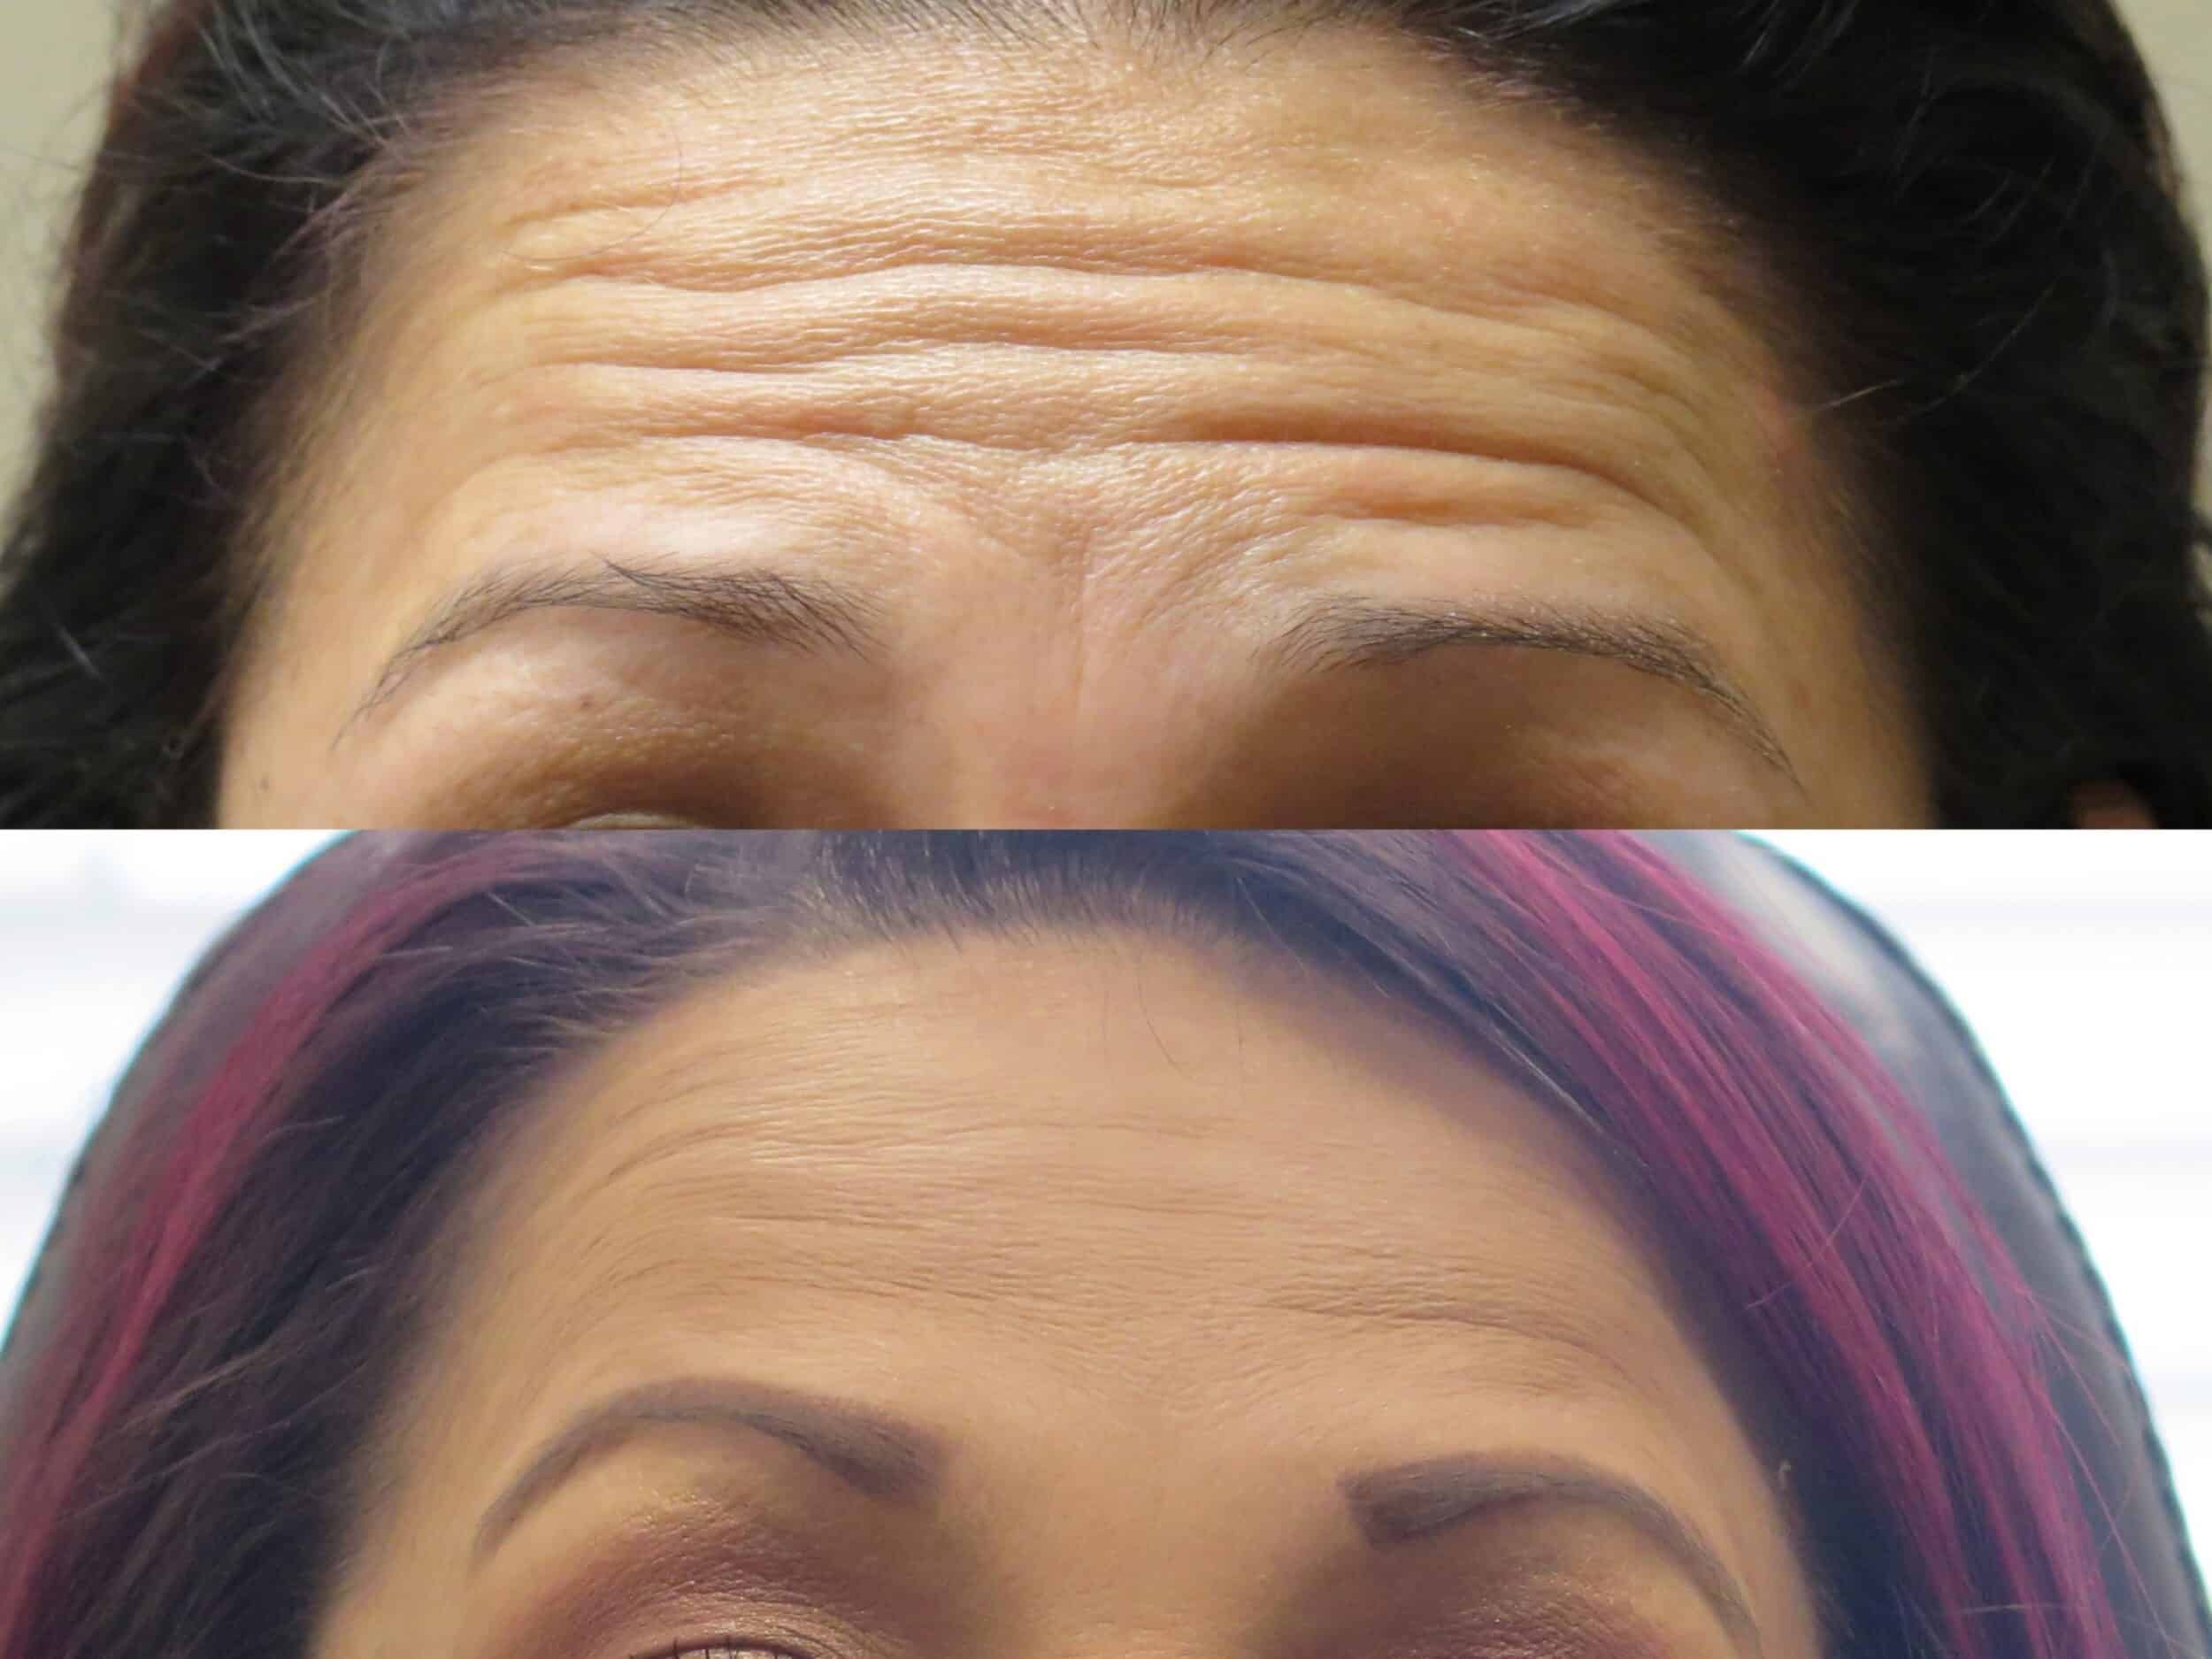 How to get rid of forehead wrinkles without Botox